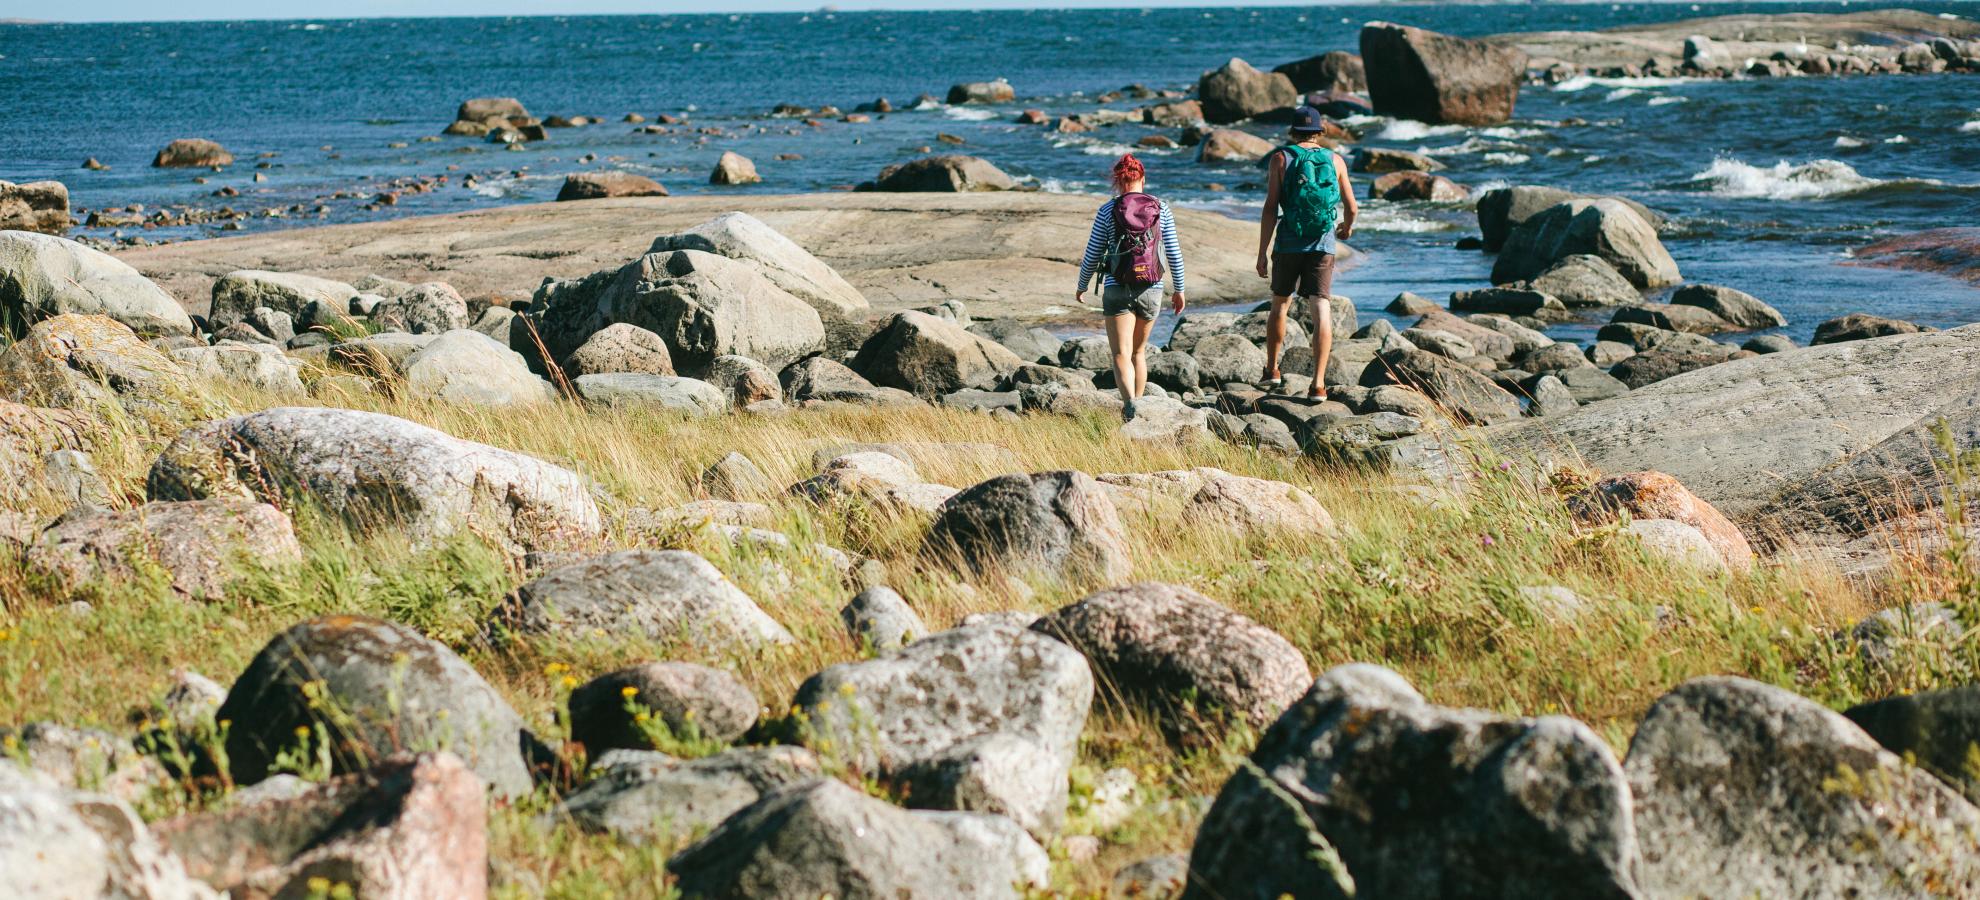 Two people are walking away from the camera along the grassy and rocky shore at Kaunisaari, the sea opening up in front of them towards the horizon. 